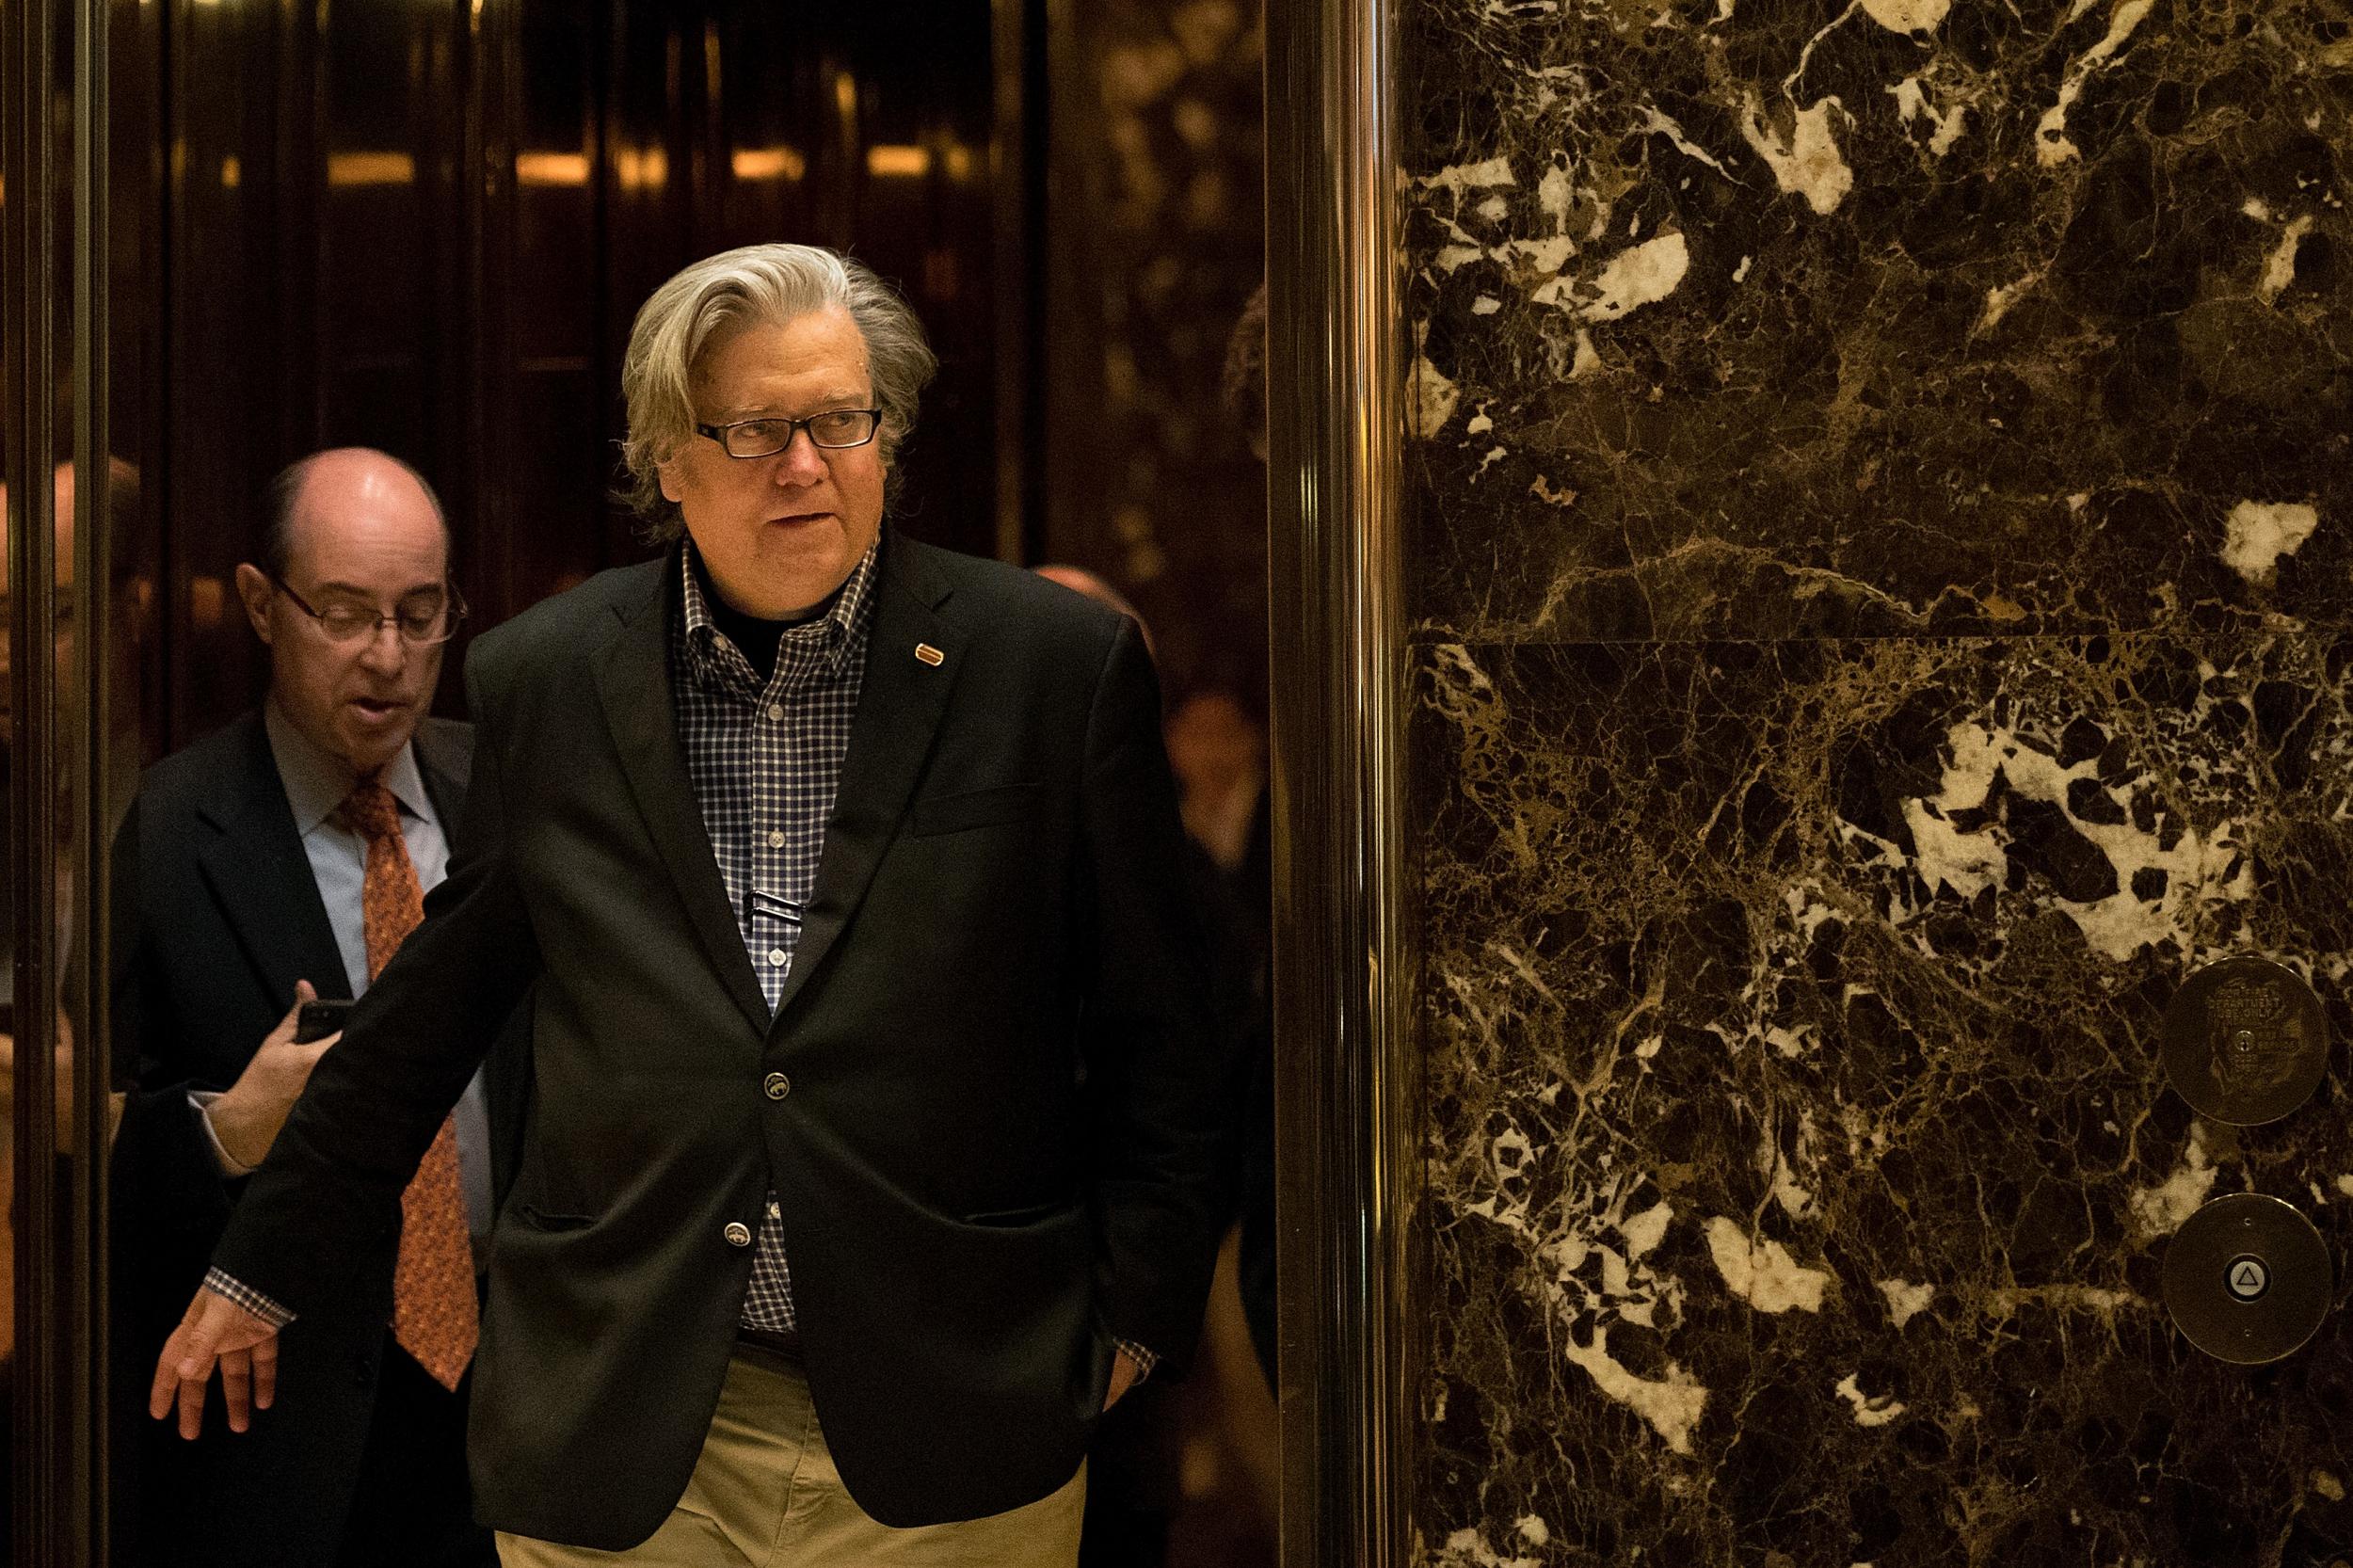 Steve Bannon's appointment as Trump's chief strategist has sparked controversy across the US